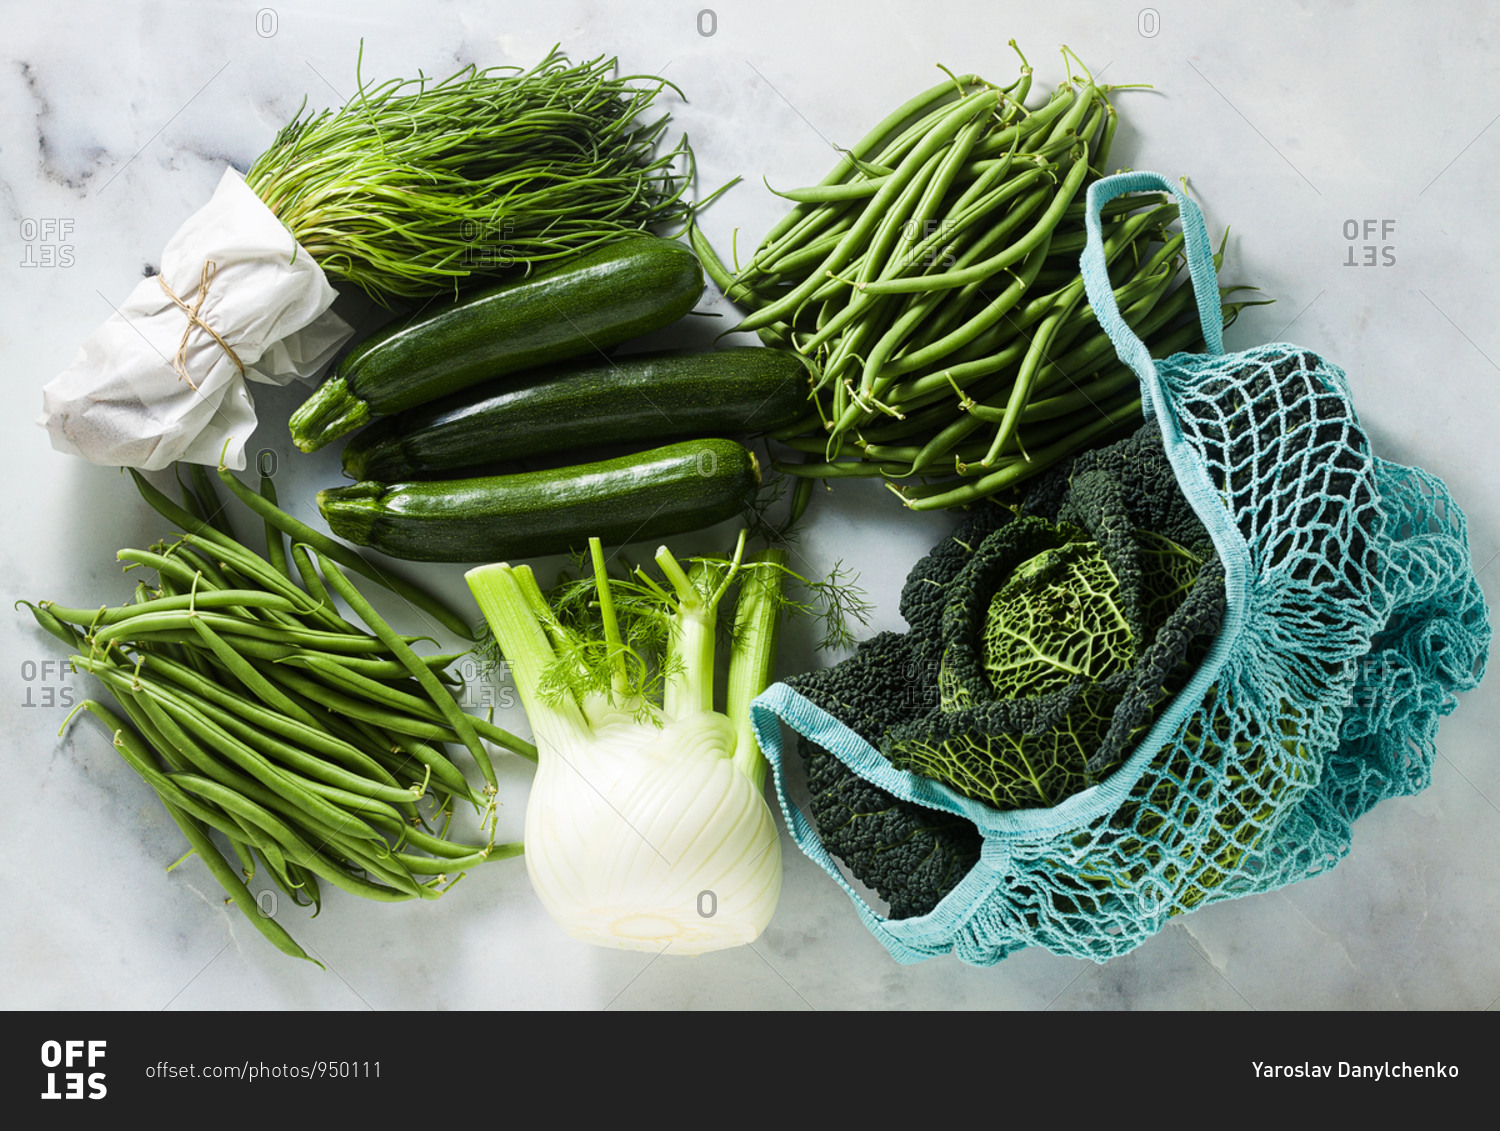 Green Italian vegetables on a marble table and Cotton Mesh Net String Shopping Bag. Zucchini, green beans, fennel, savoy cabbage and Salsola soda.